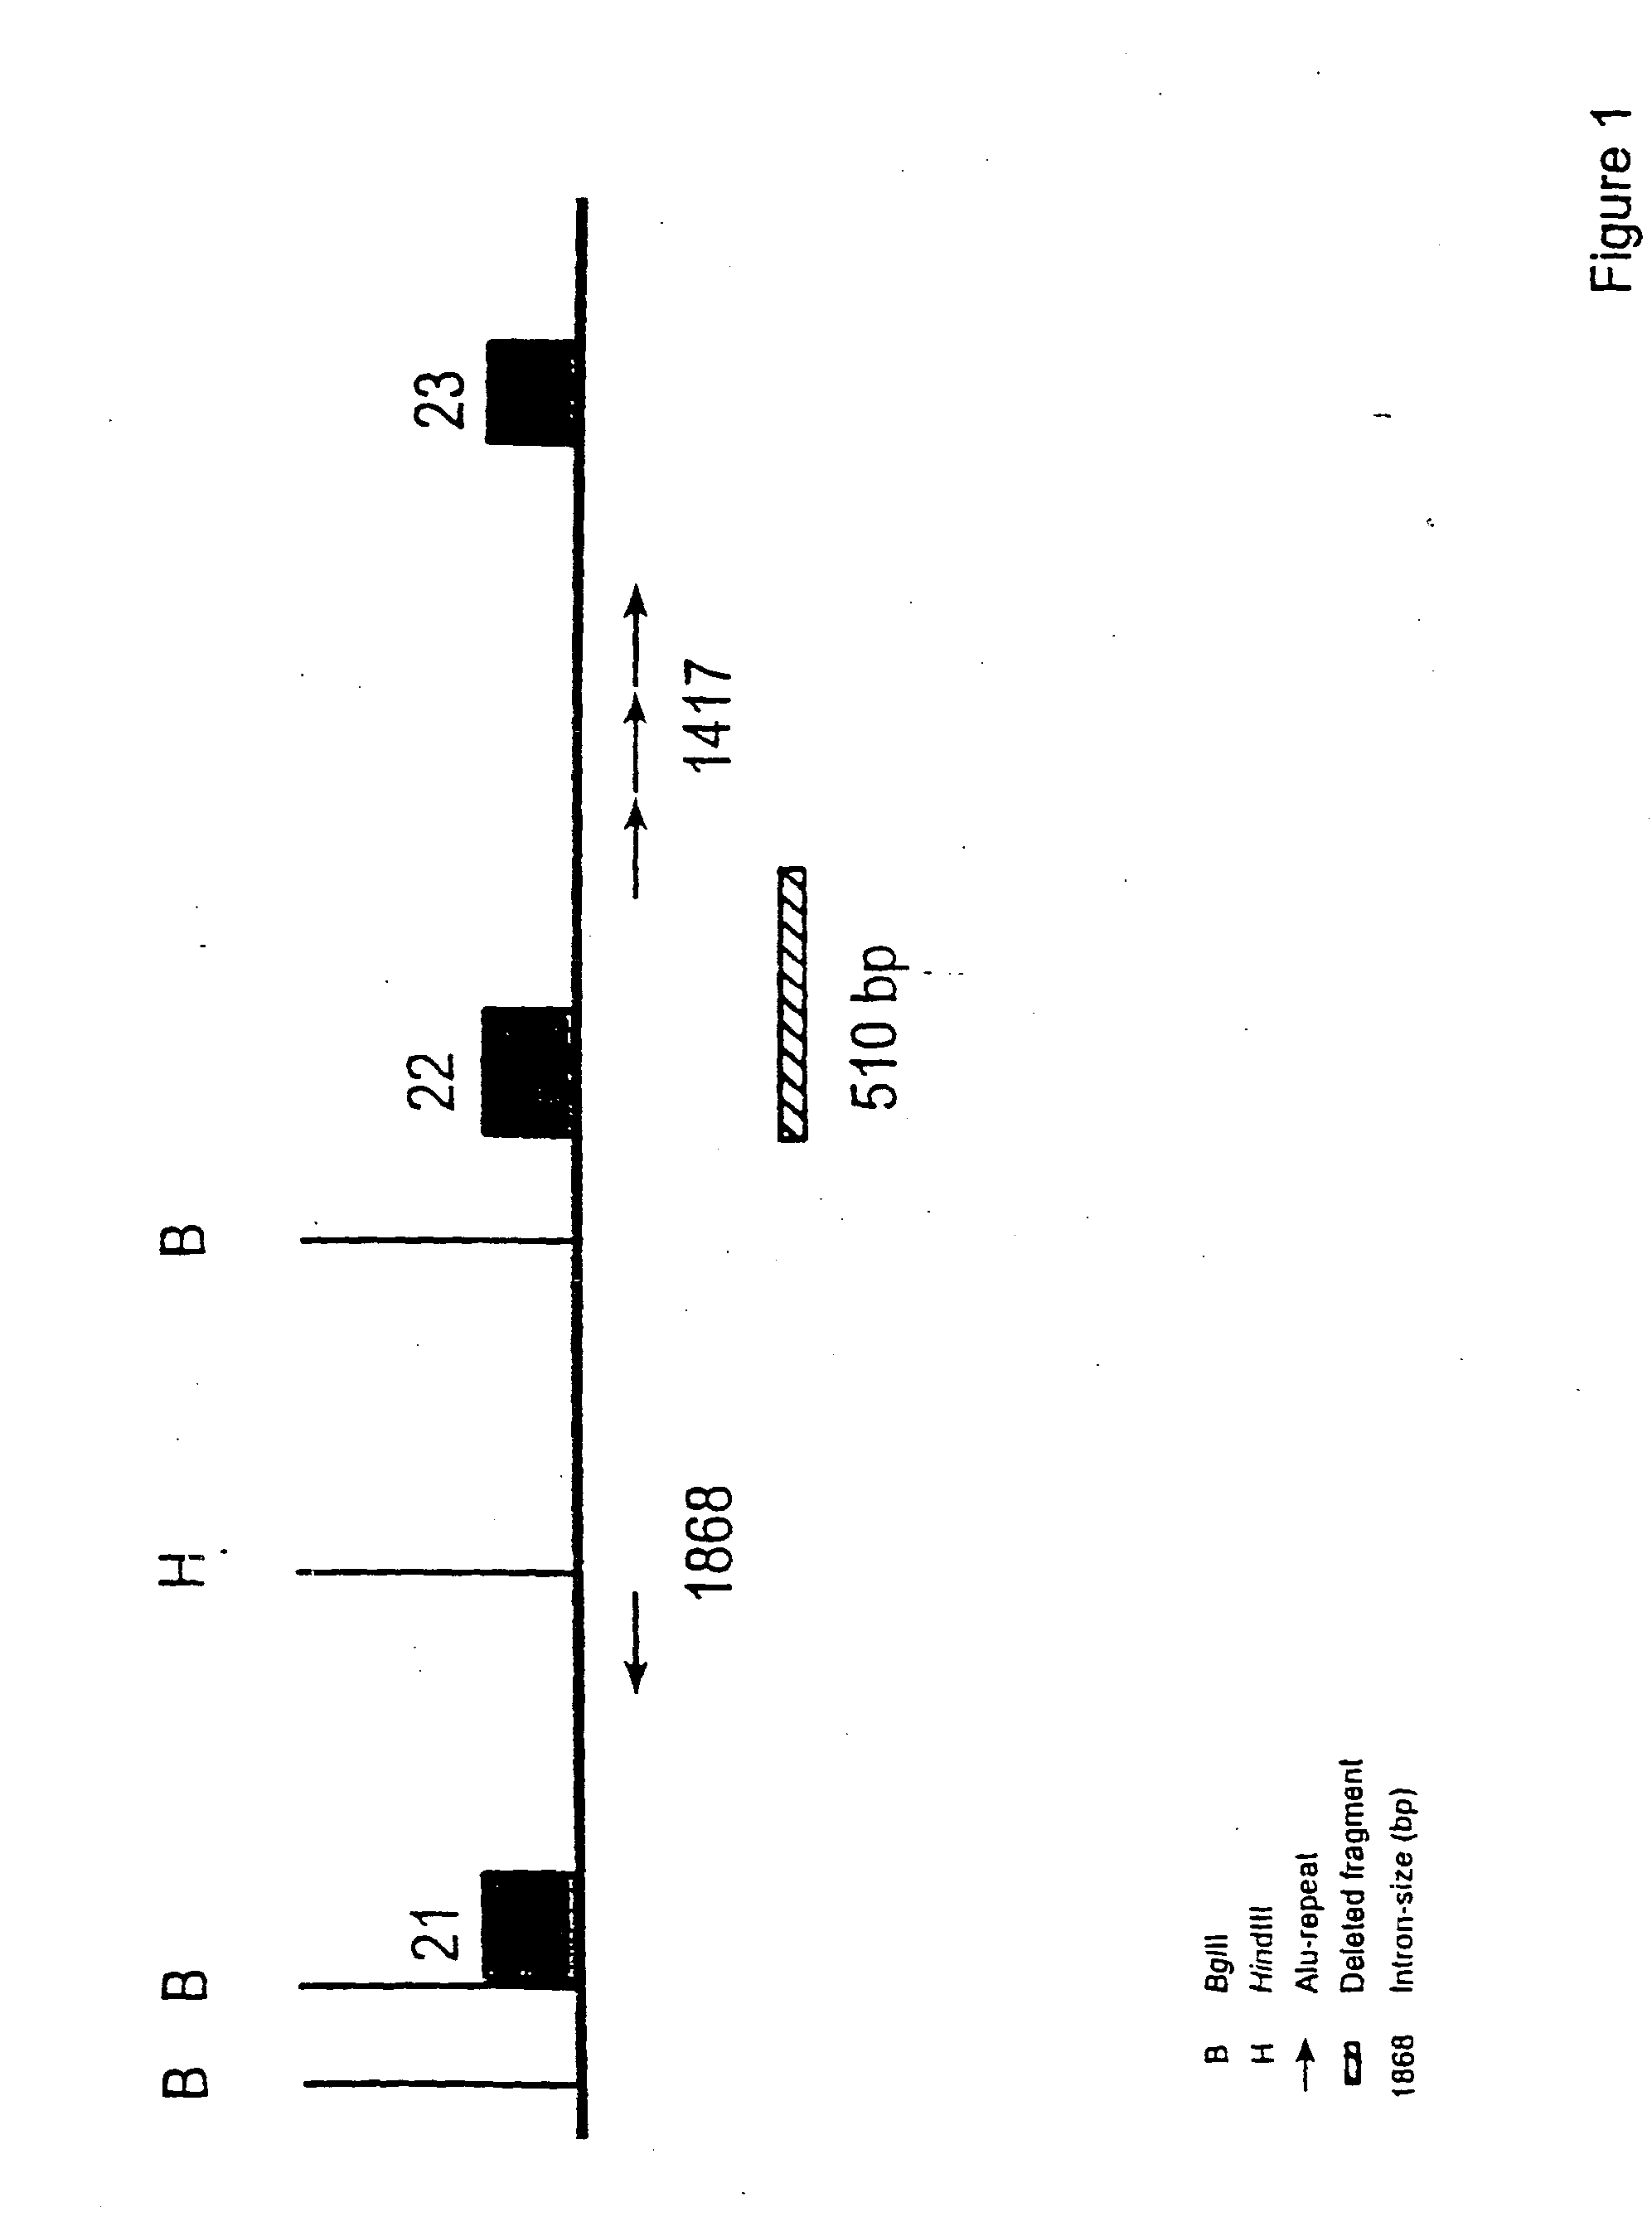 Diagnostic test kit for determining a predisposition for breast and ovarian cancer, materials and methods for such determination